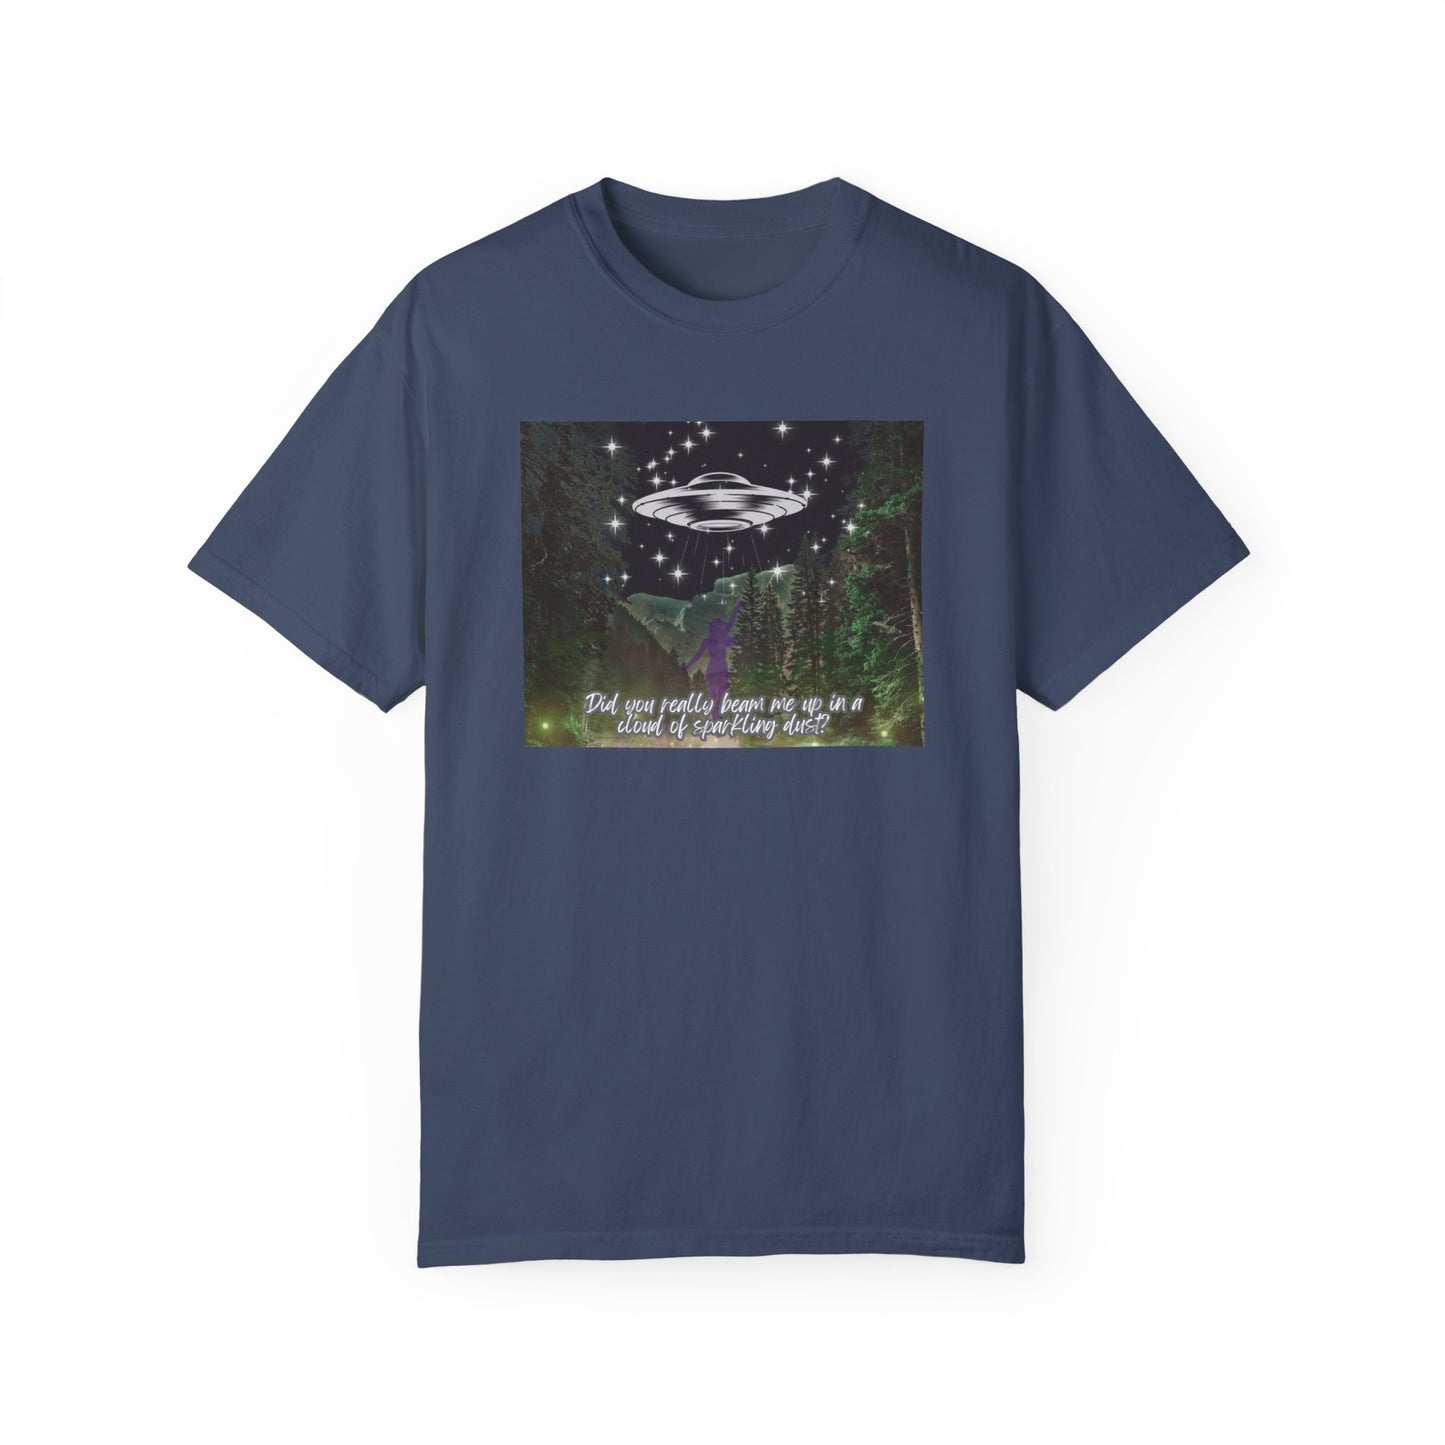 Did You Really Beam Me Up T-Shirt